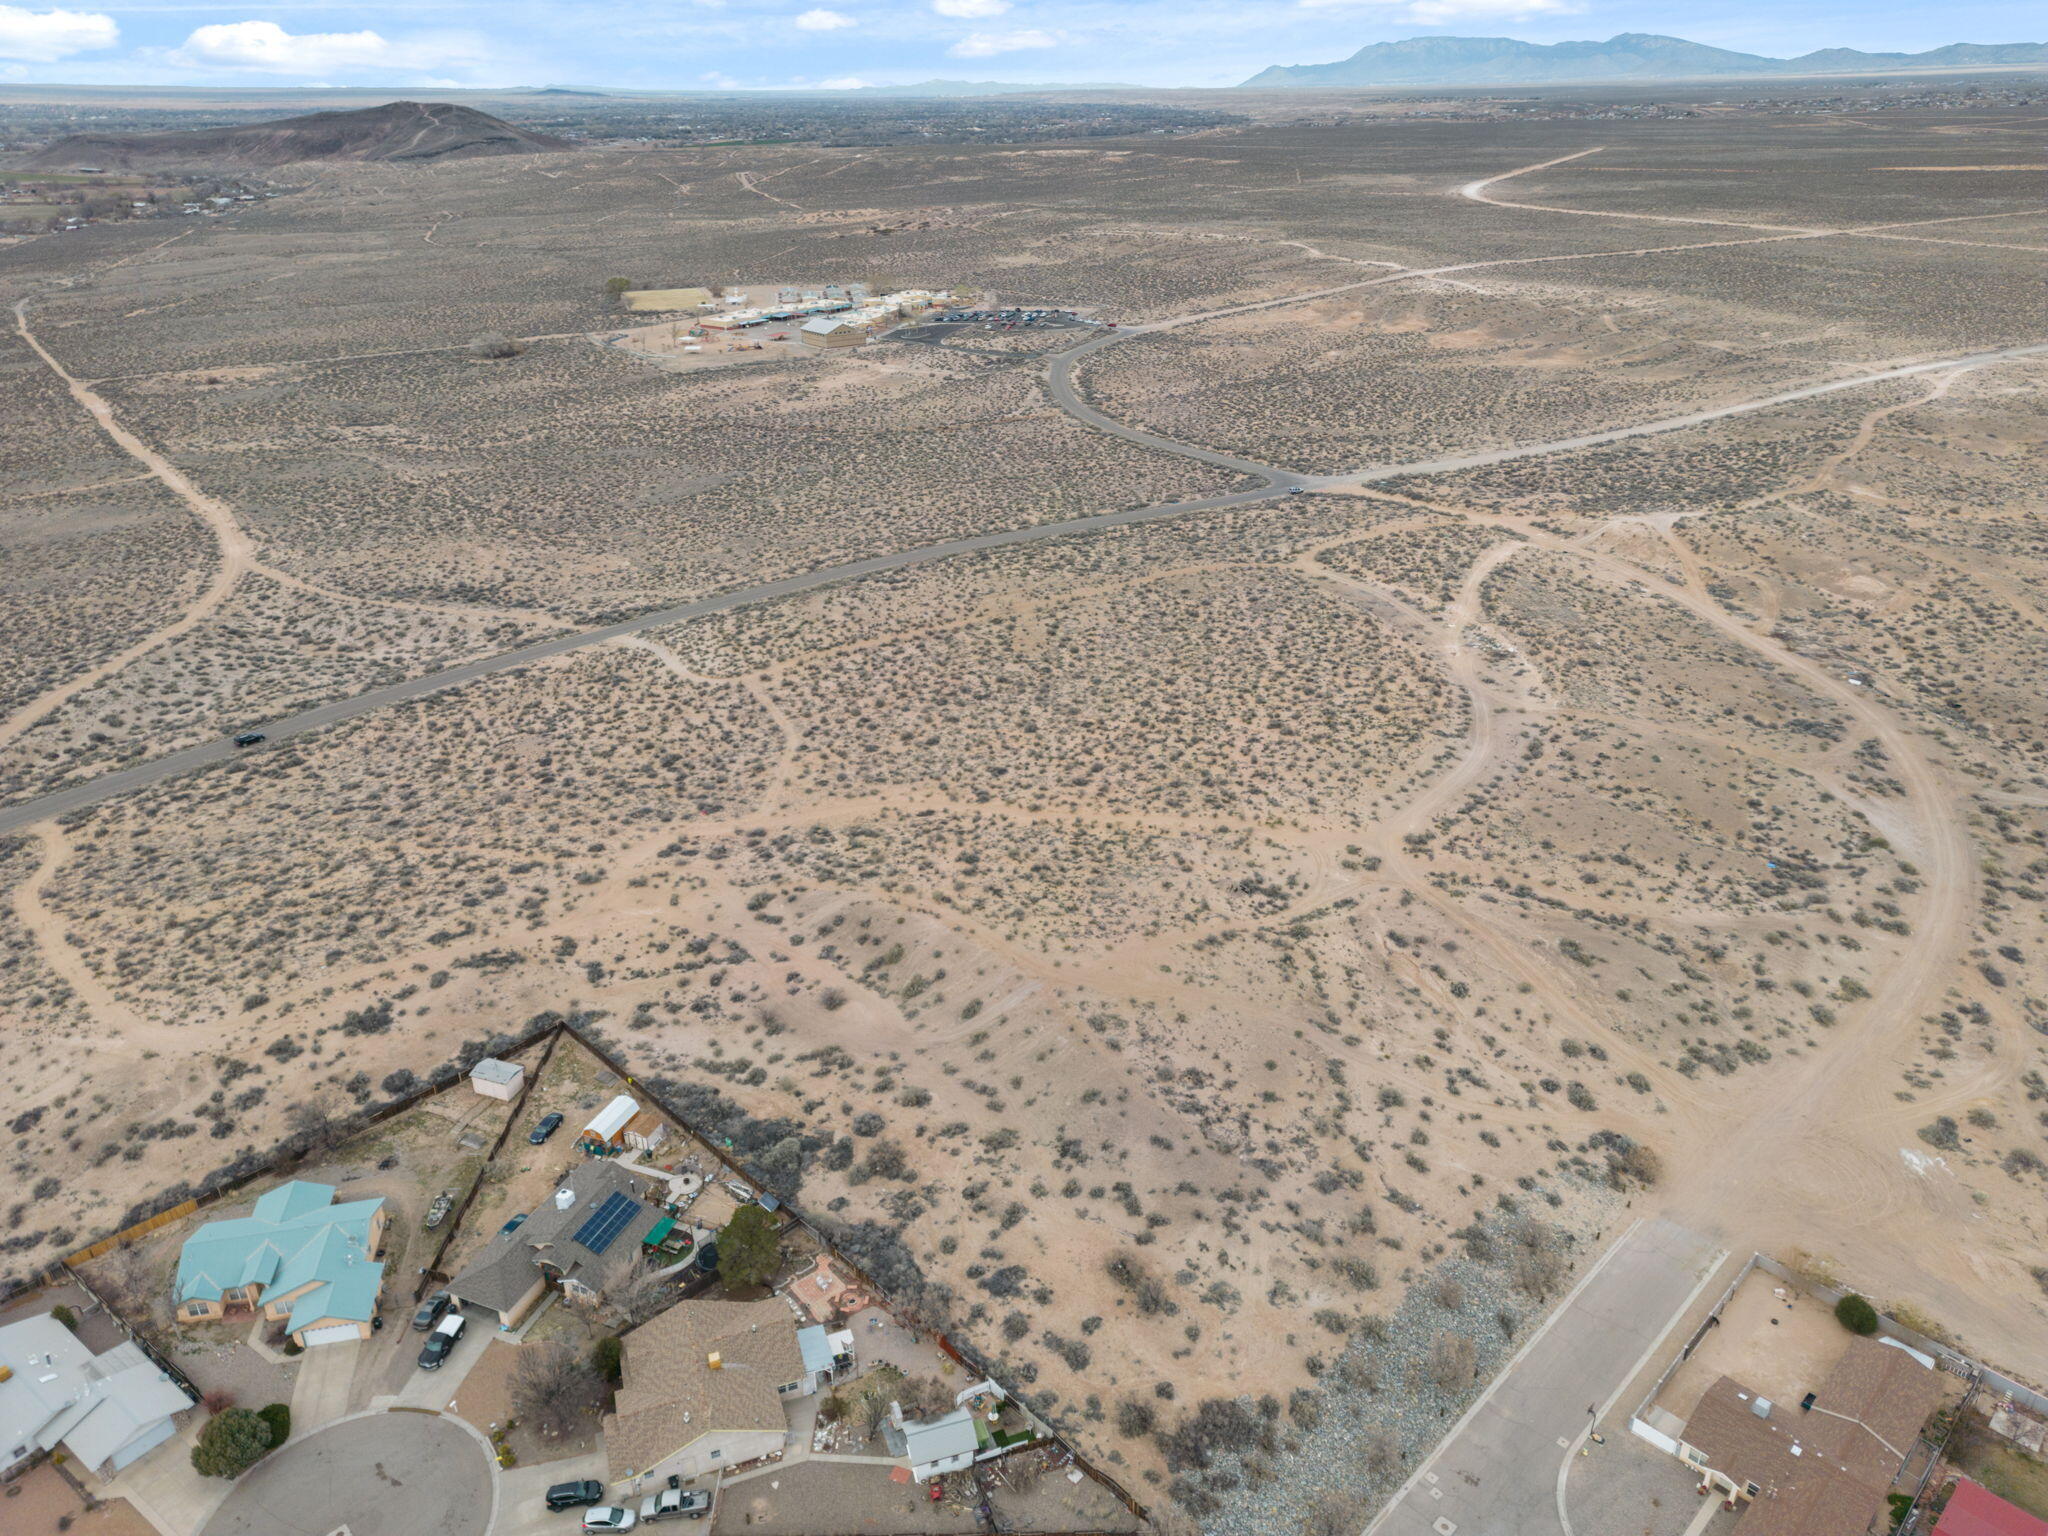 Tbd Chacon Boulevard, Los Lunas, New Mexico 87031, ,Land,For Sale,Tbd Chacon Boulevard,1058374